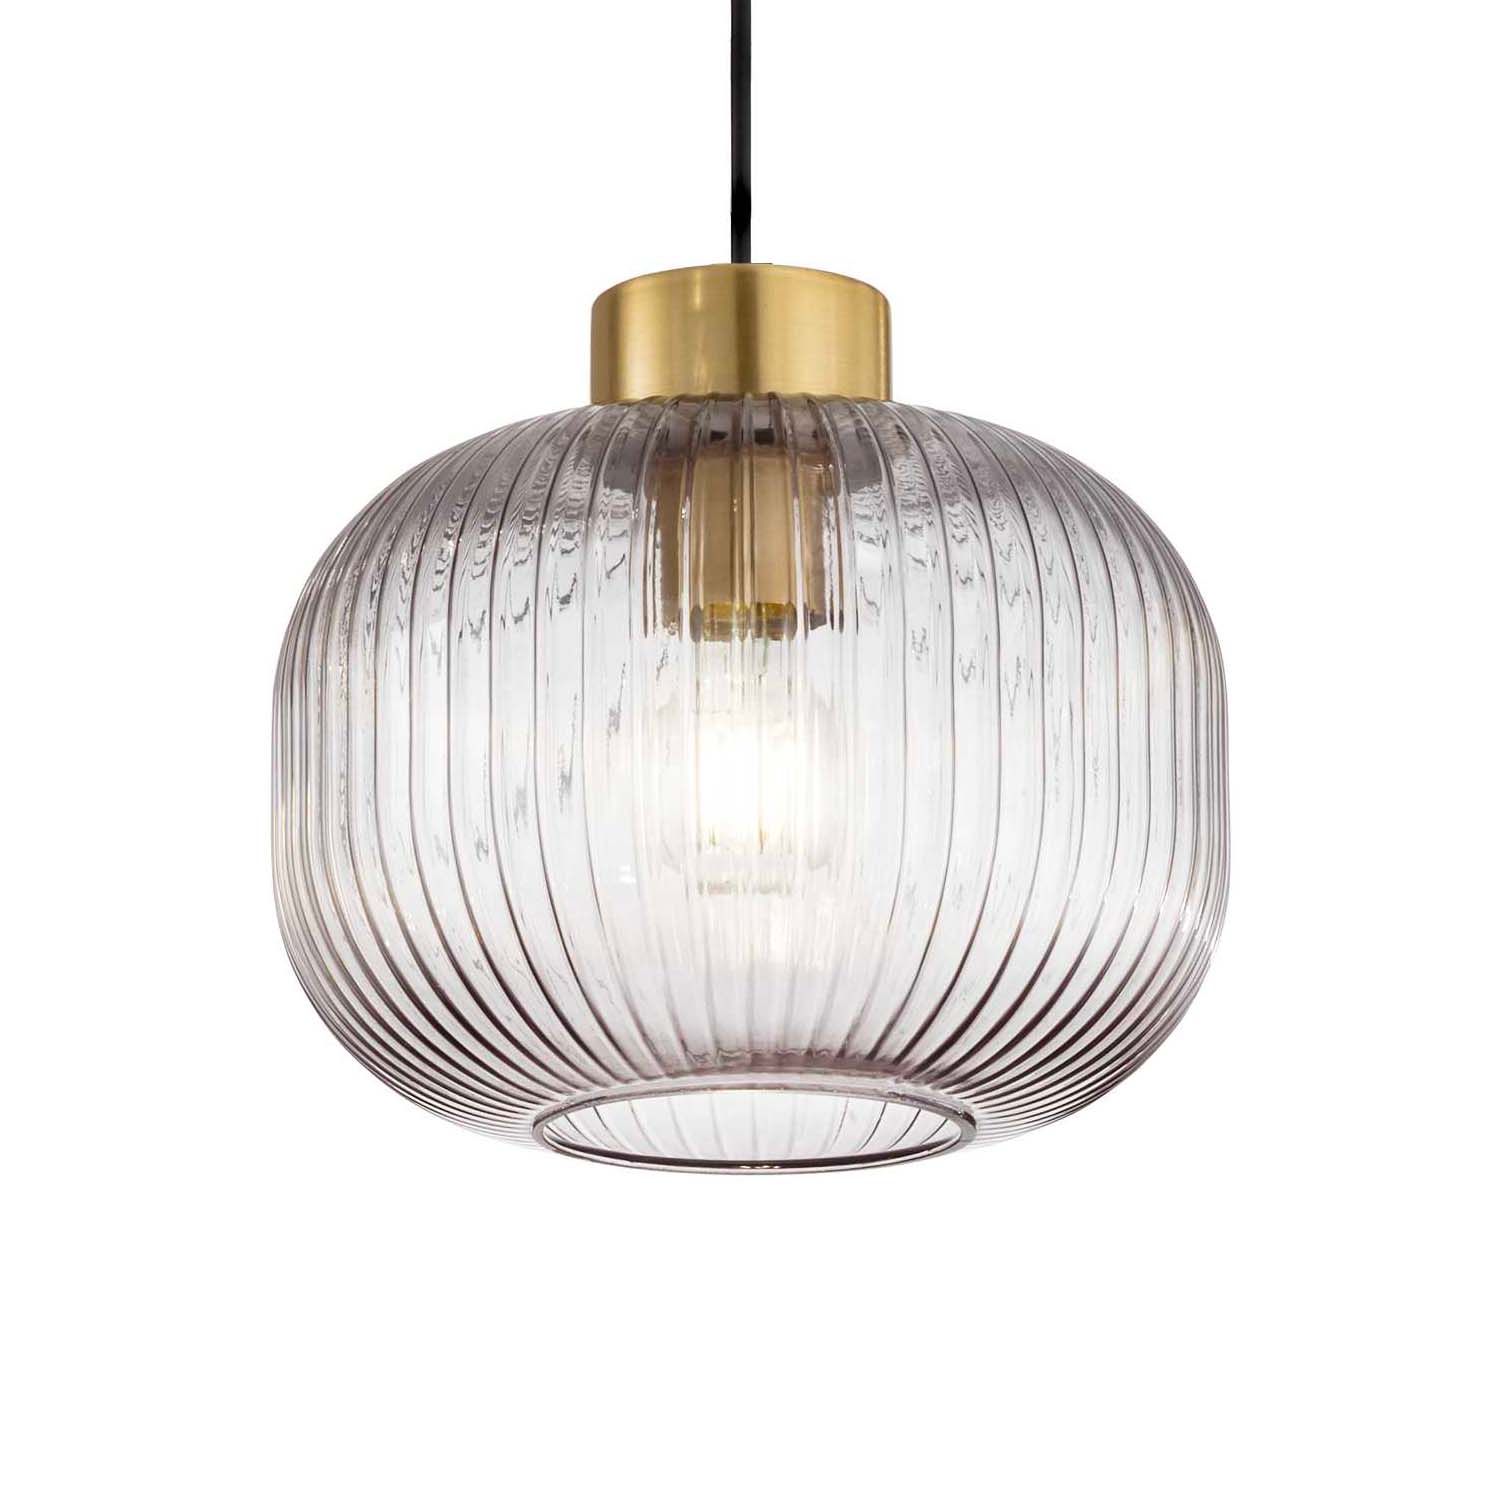 MINT - Chic pendant light in smoked or mint green glass